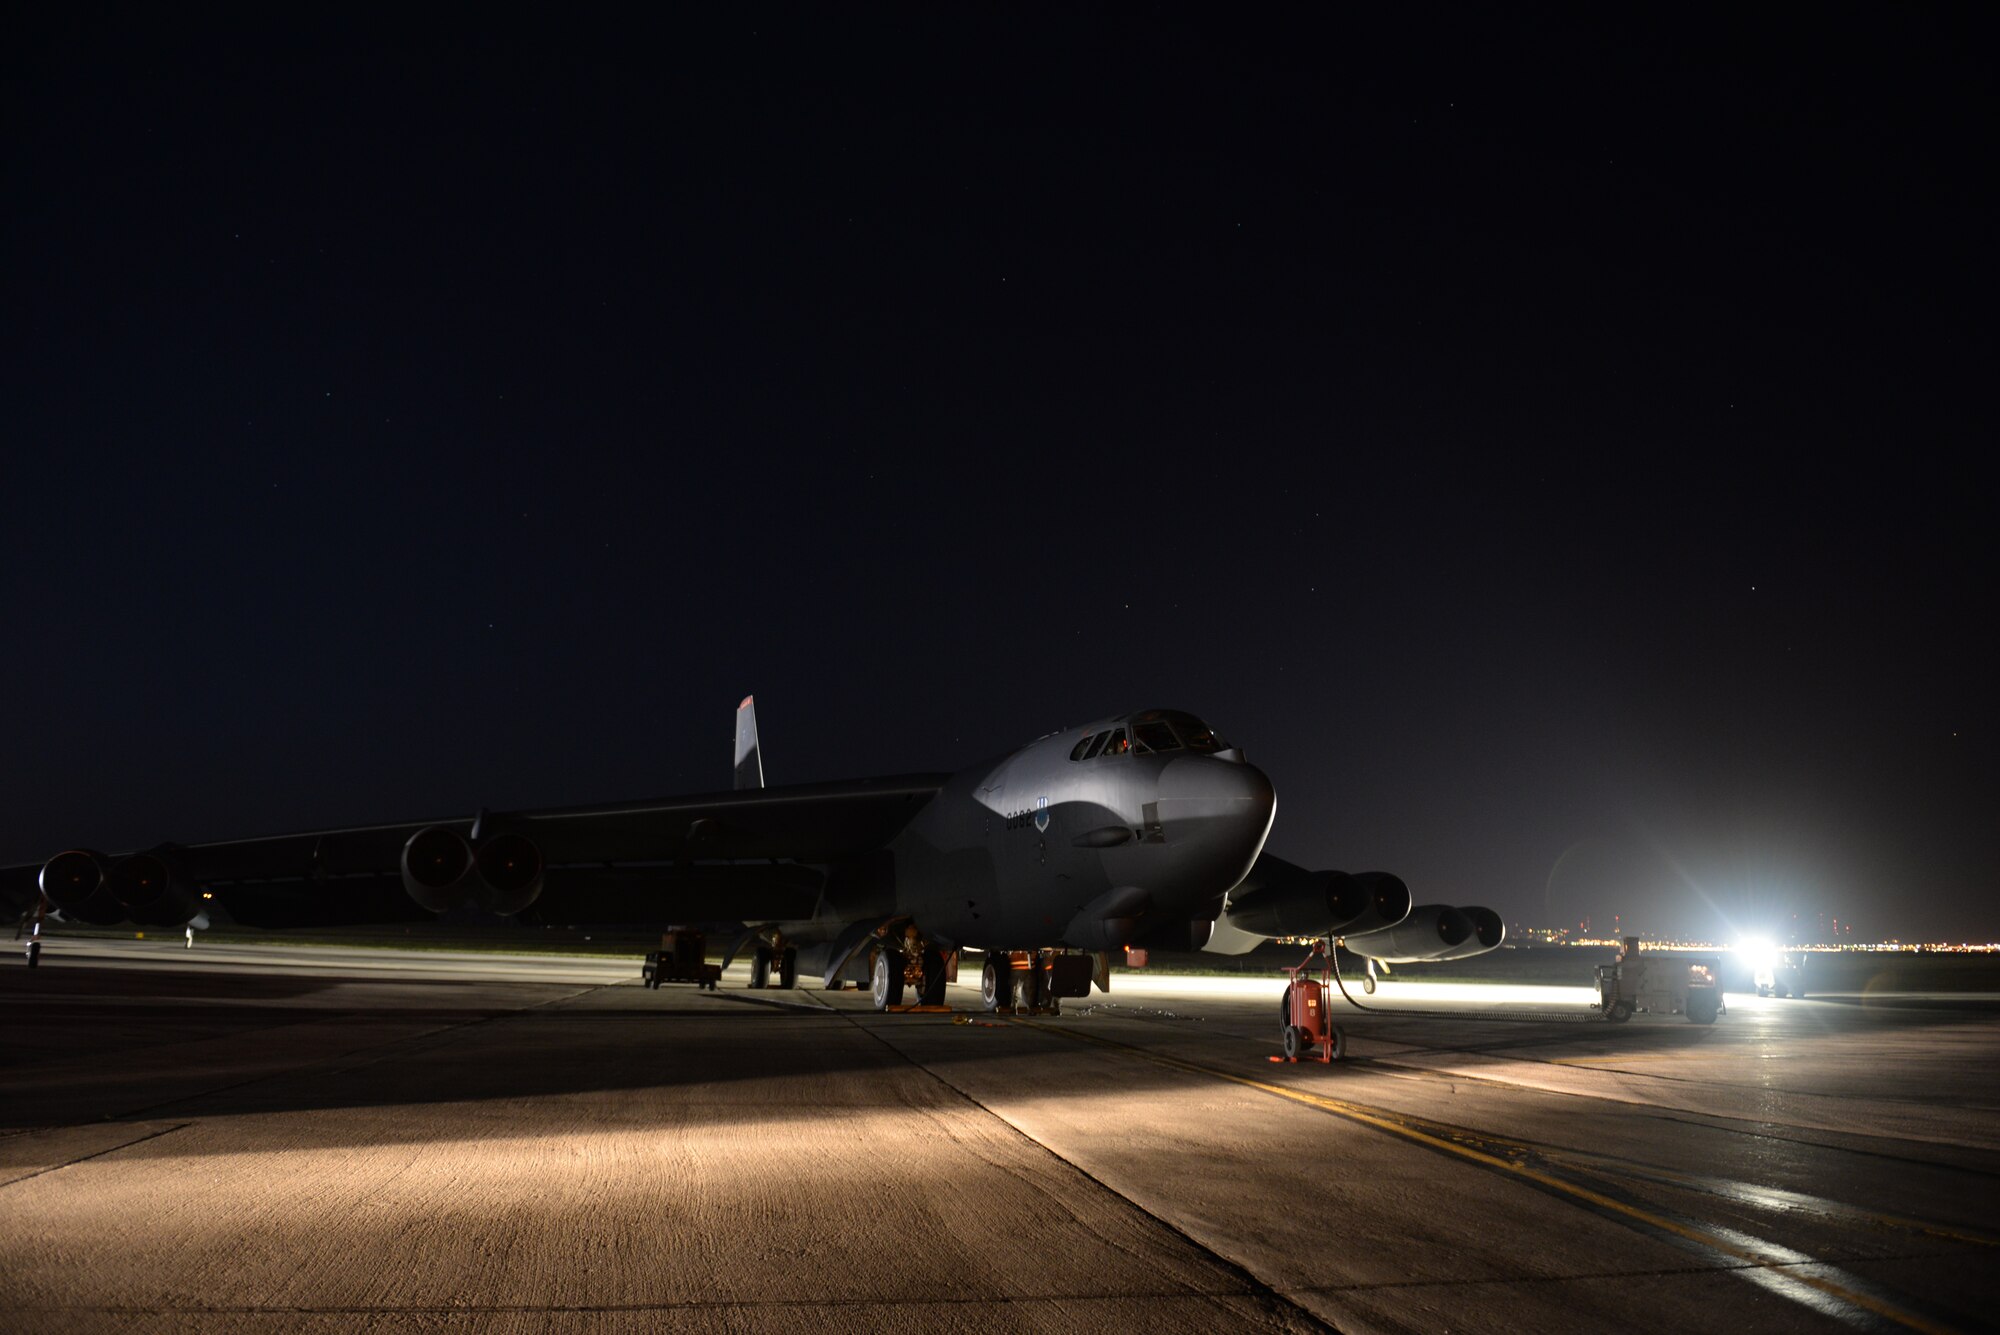 A B-52H Stratofortress, assigned to the 96th Bomb Squadron, Barksdale Air Force Base, Louisiana, sits ready for departure from Ellsworth Air Force Base, South Dakota, prior to a mission to the U.S. Southern Command area of operations Aug. 11, 2014. Assigned to the 2nd Bomb Wing, Barksdale, the aircraft and seven-person aircrew participated in PANAMAX 2014, an annual, U.S. Southern Command-sponsored multinational exercise that focuses on ensuring the defense of the Panama Canal. (U.S. Air Force photo by Airman 1st Class Rebecca Imwalle)